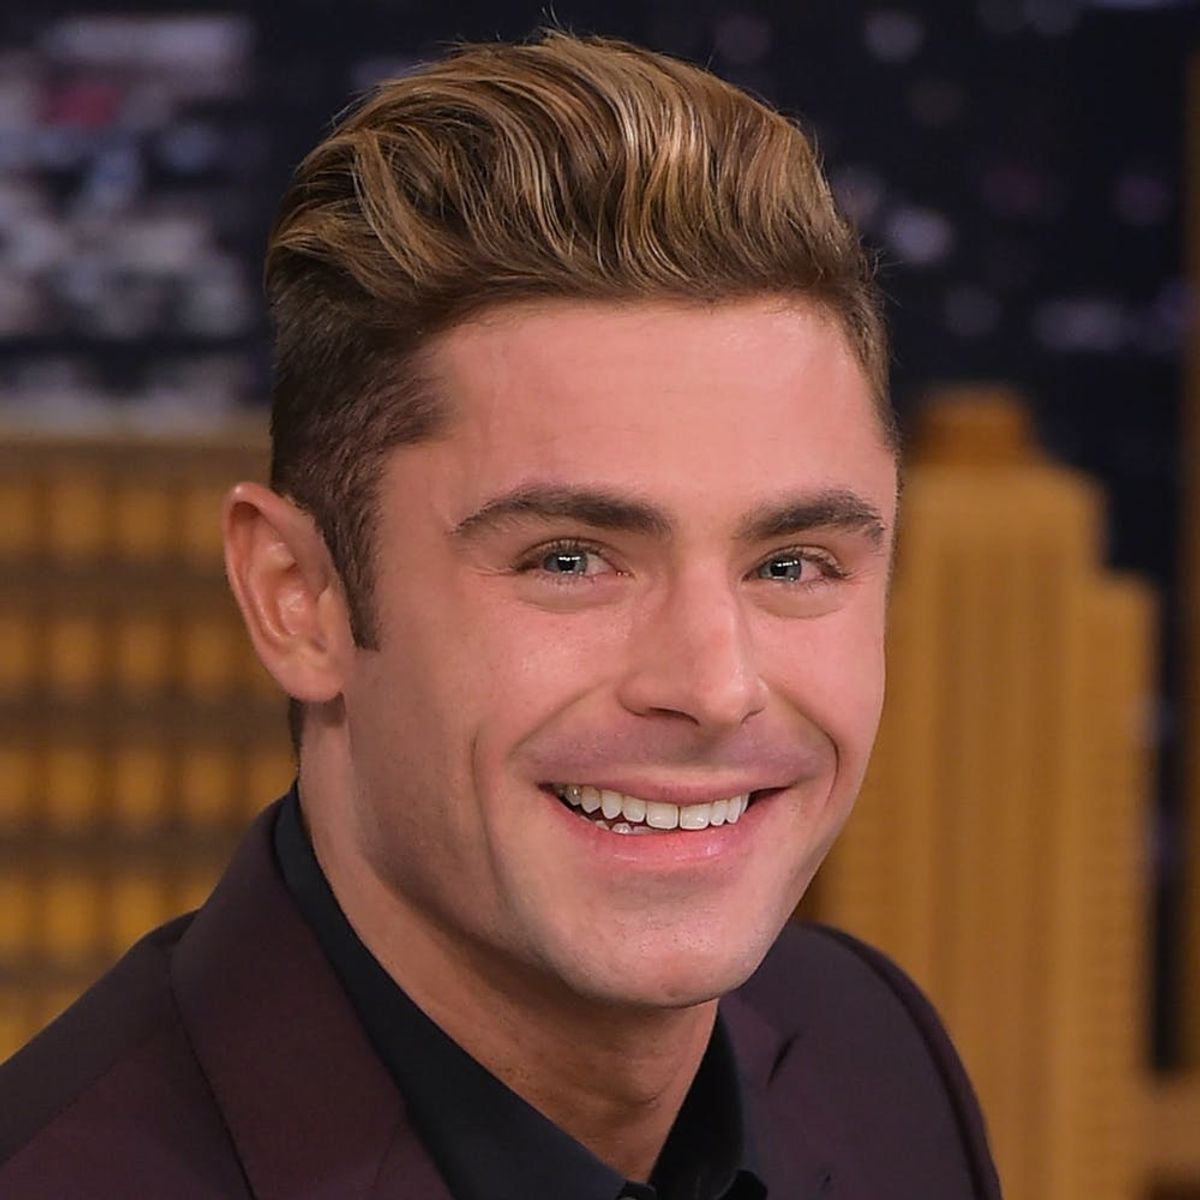 Zac Efron’s Latest Hair Transformation Is His Most Shocking Yet